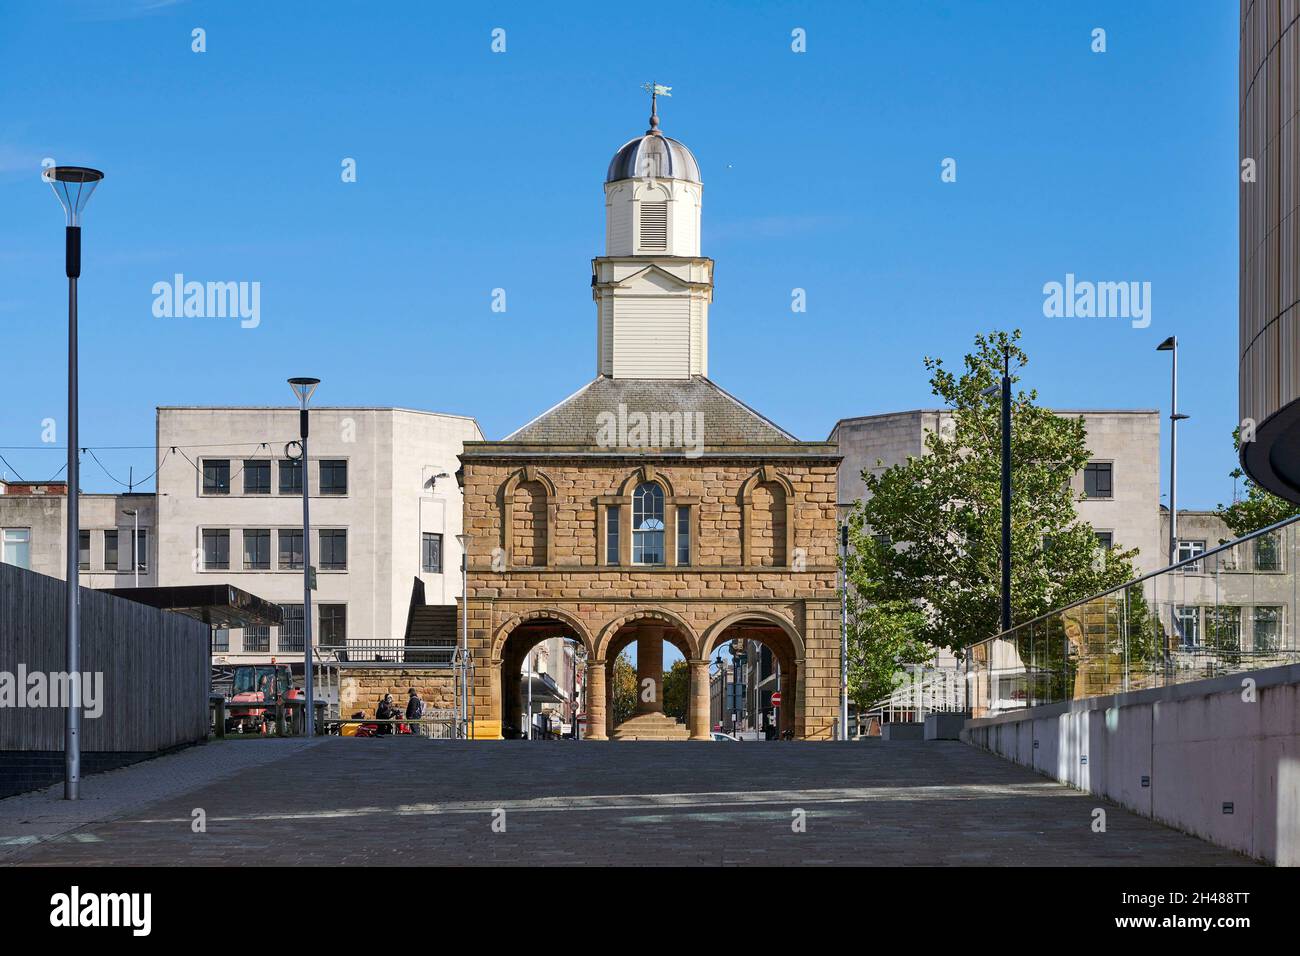 Market Square at South Shields, with the Old Town Hall, Tyneside, North East England, UK Stock Photo